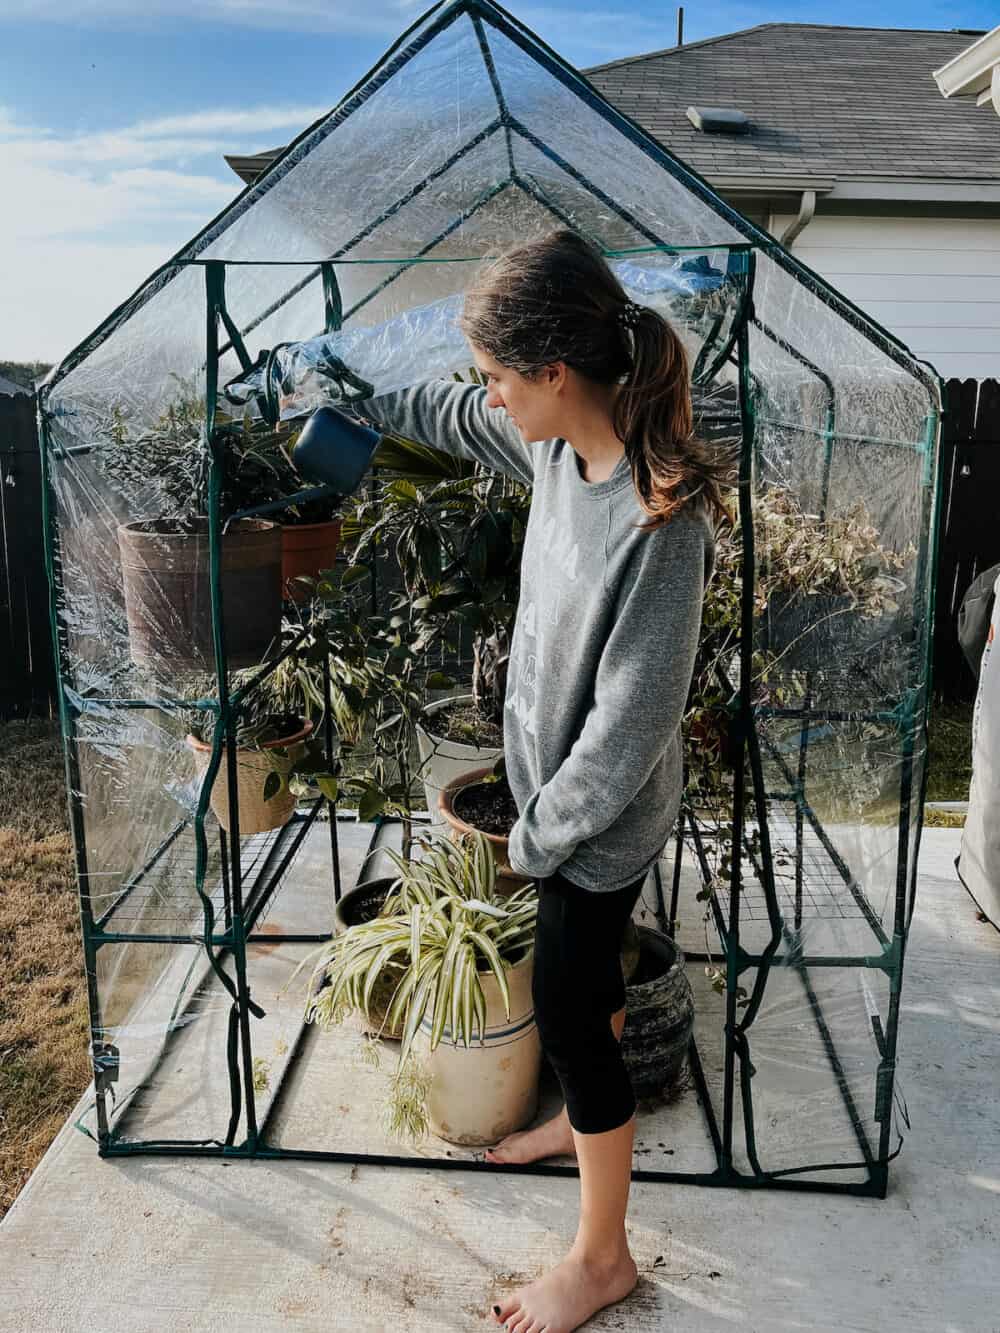 woman watering plants inside a portable greenhouse